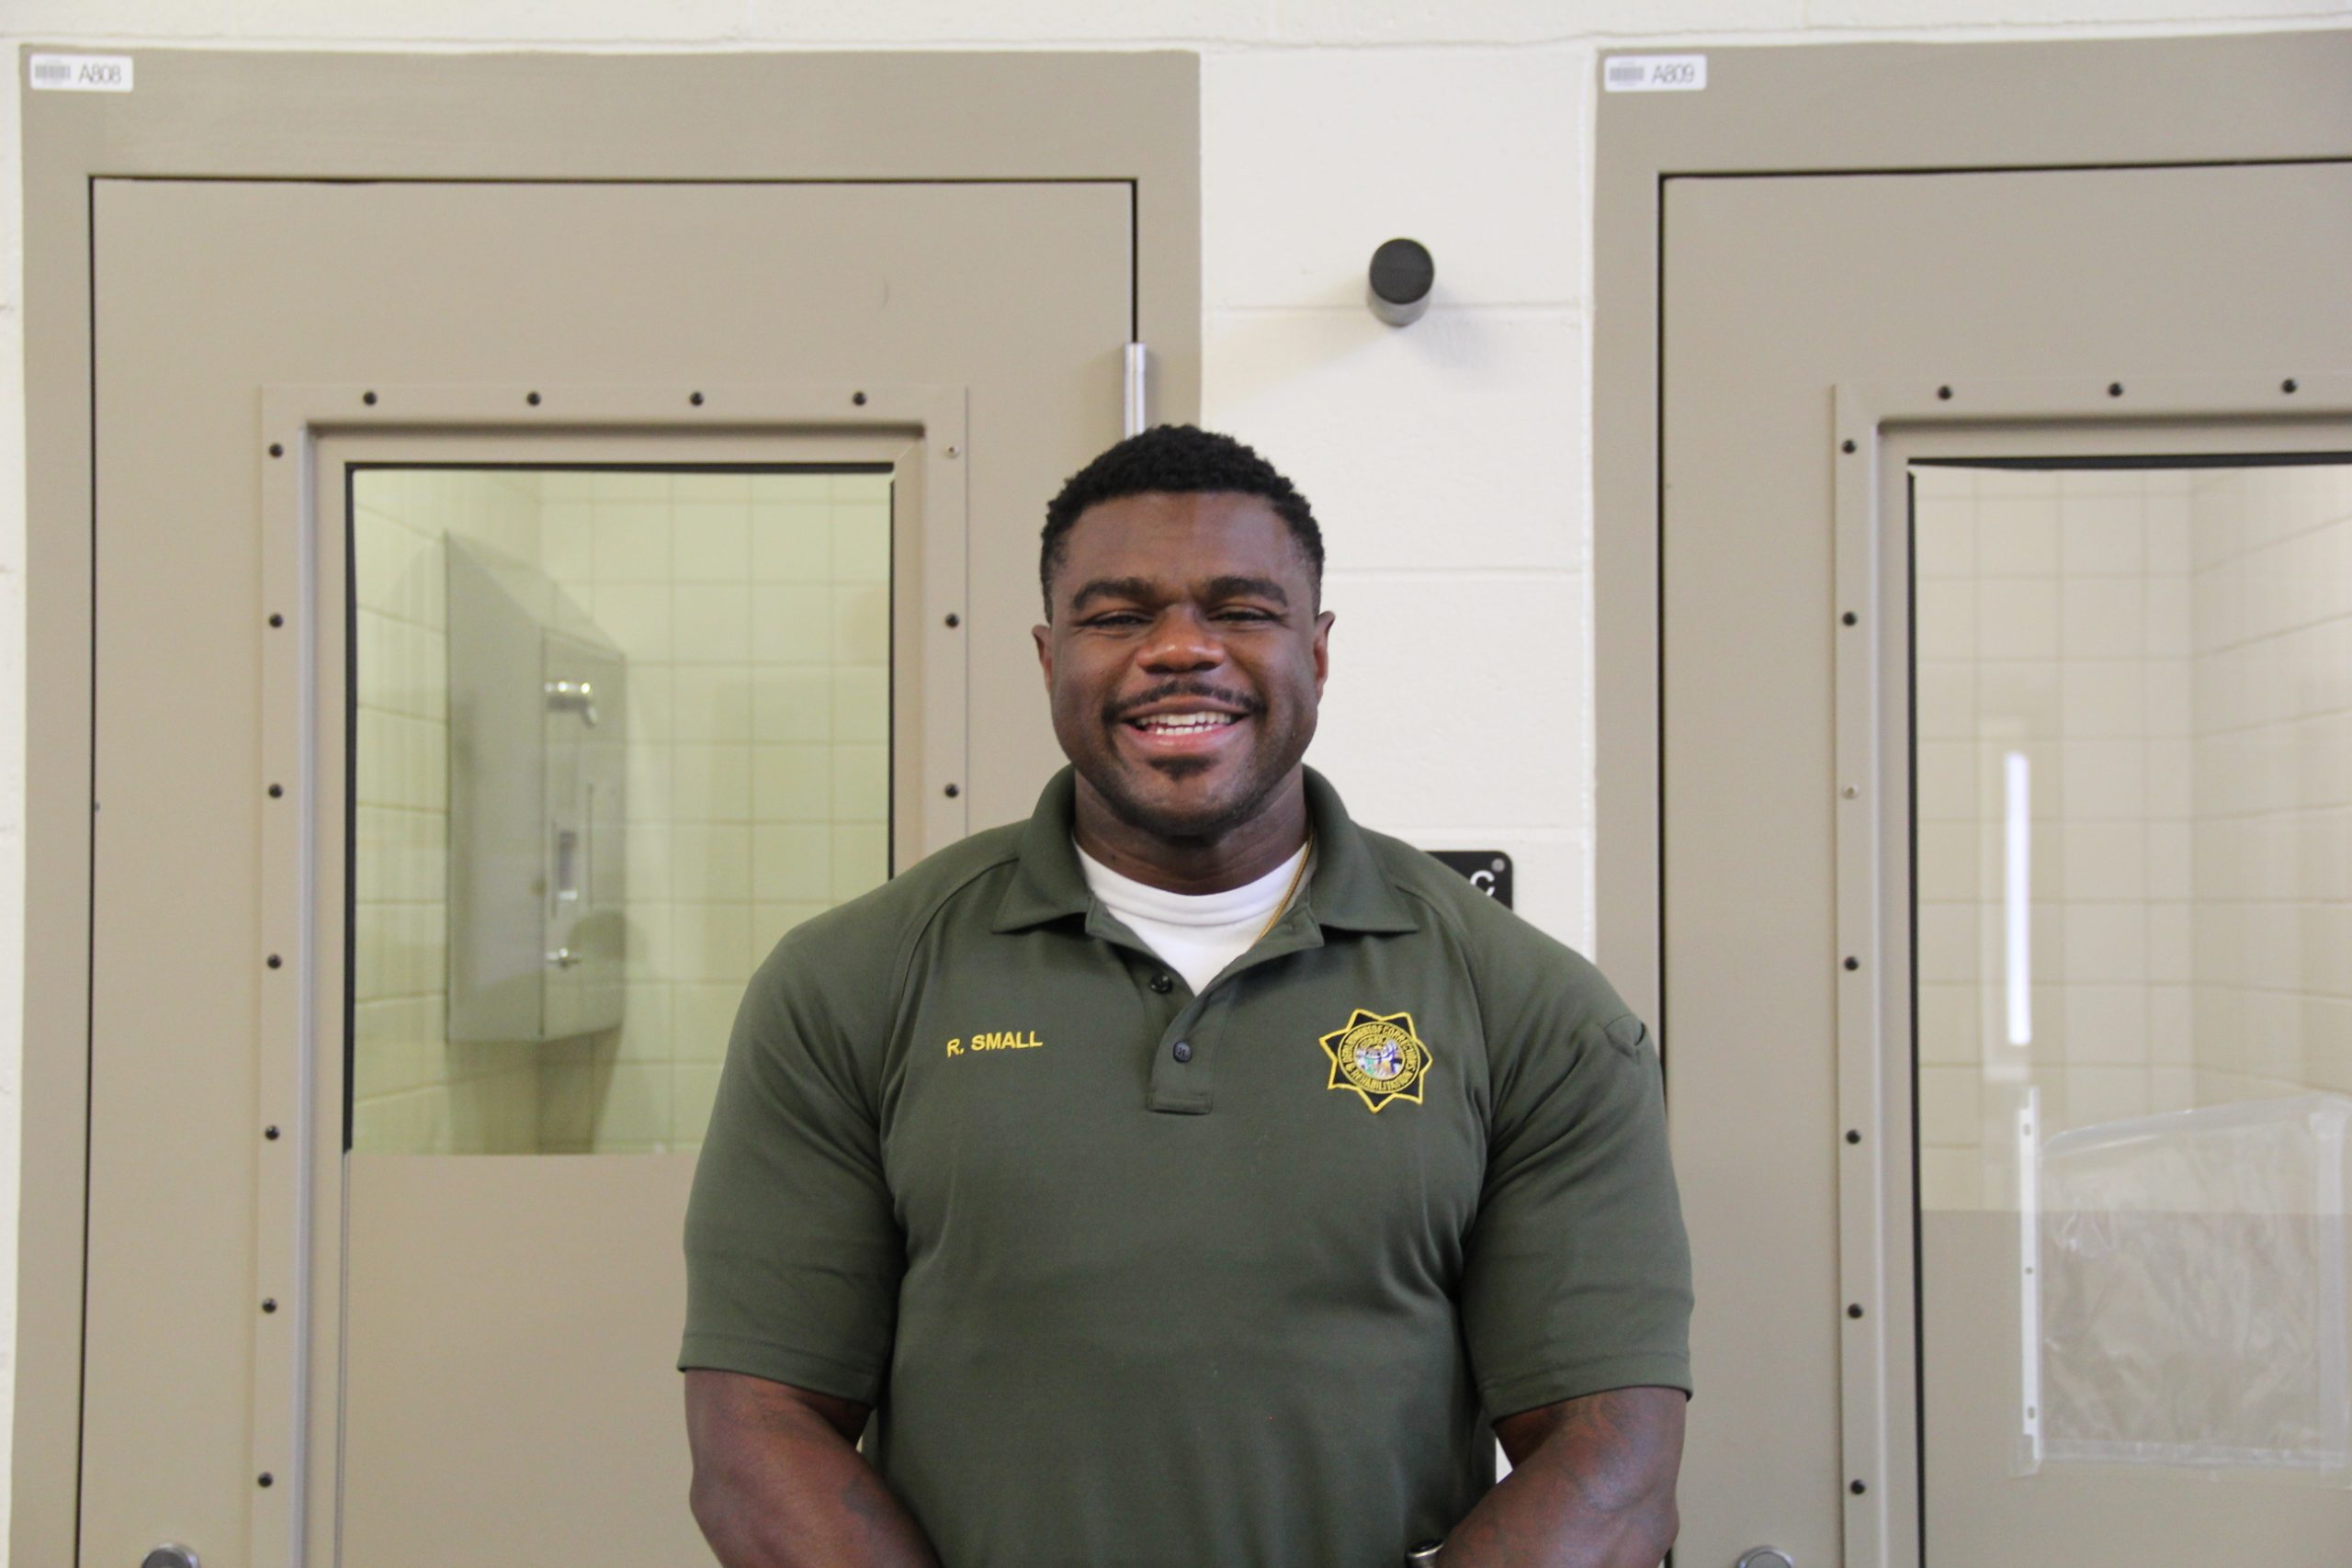 Officer Small standing in front of two prison cell doors.